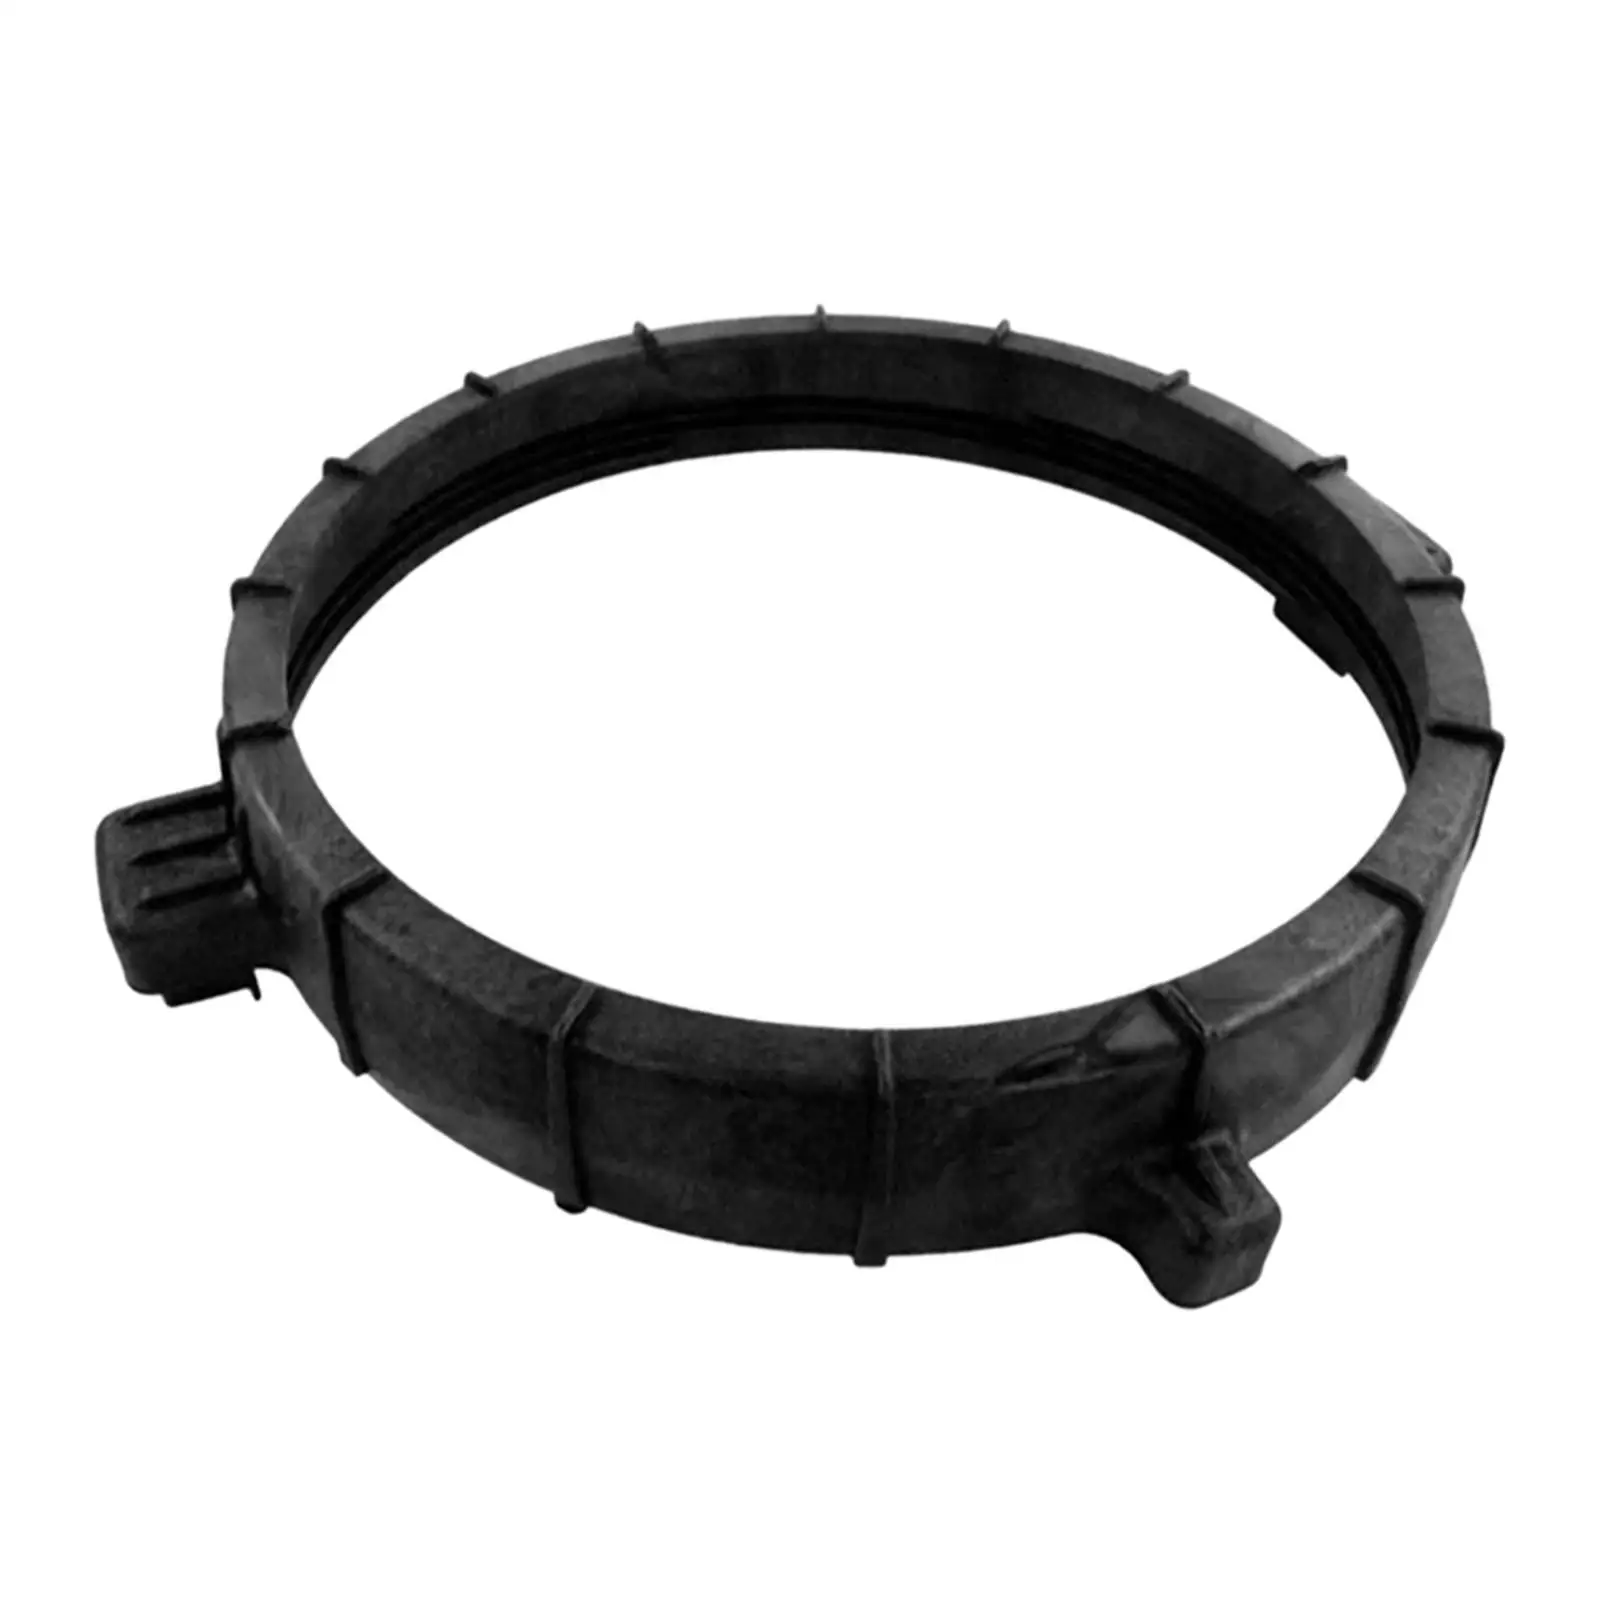 Lock Ring Assembly Water Treatment 59052900 Swimming Pool Accessories Easy to Install Pool Filter Component Replacement Part